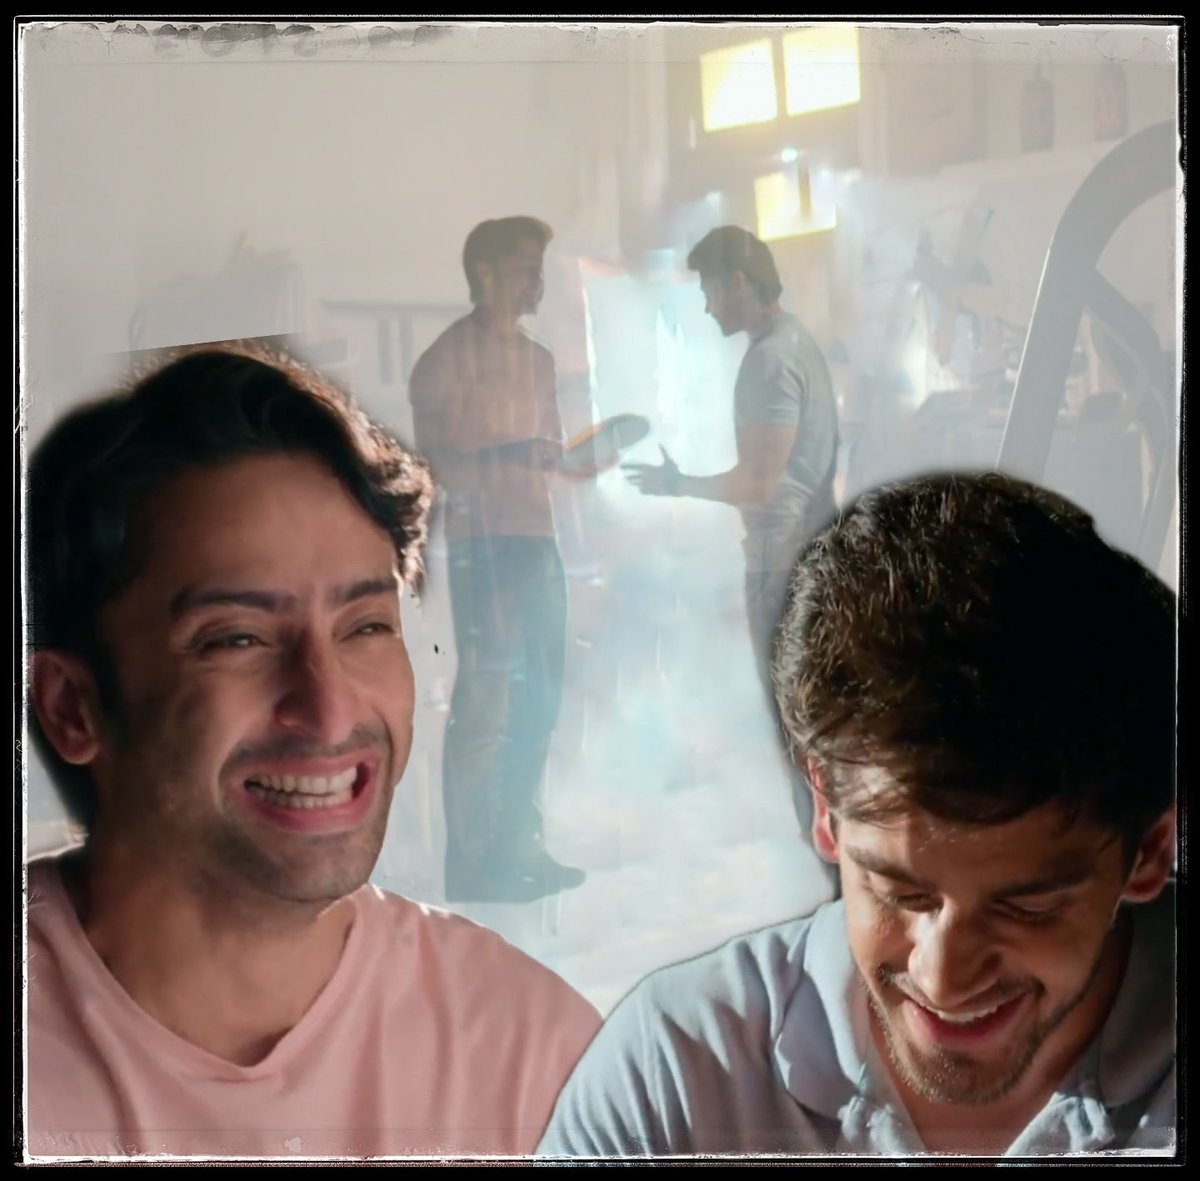 Down the memory lane in the form of bucket list was beautiful. Both the brothers forgetting the present re-lived some of their cherished childhood memories  #RVbros #ShaheerSheikh  #avinashmishra #YehRishteyHainPyaarKe #ShaheerAsAbir